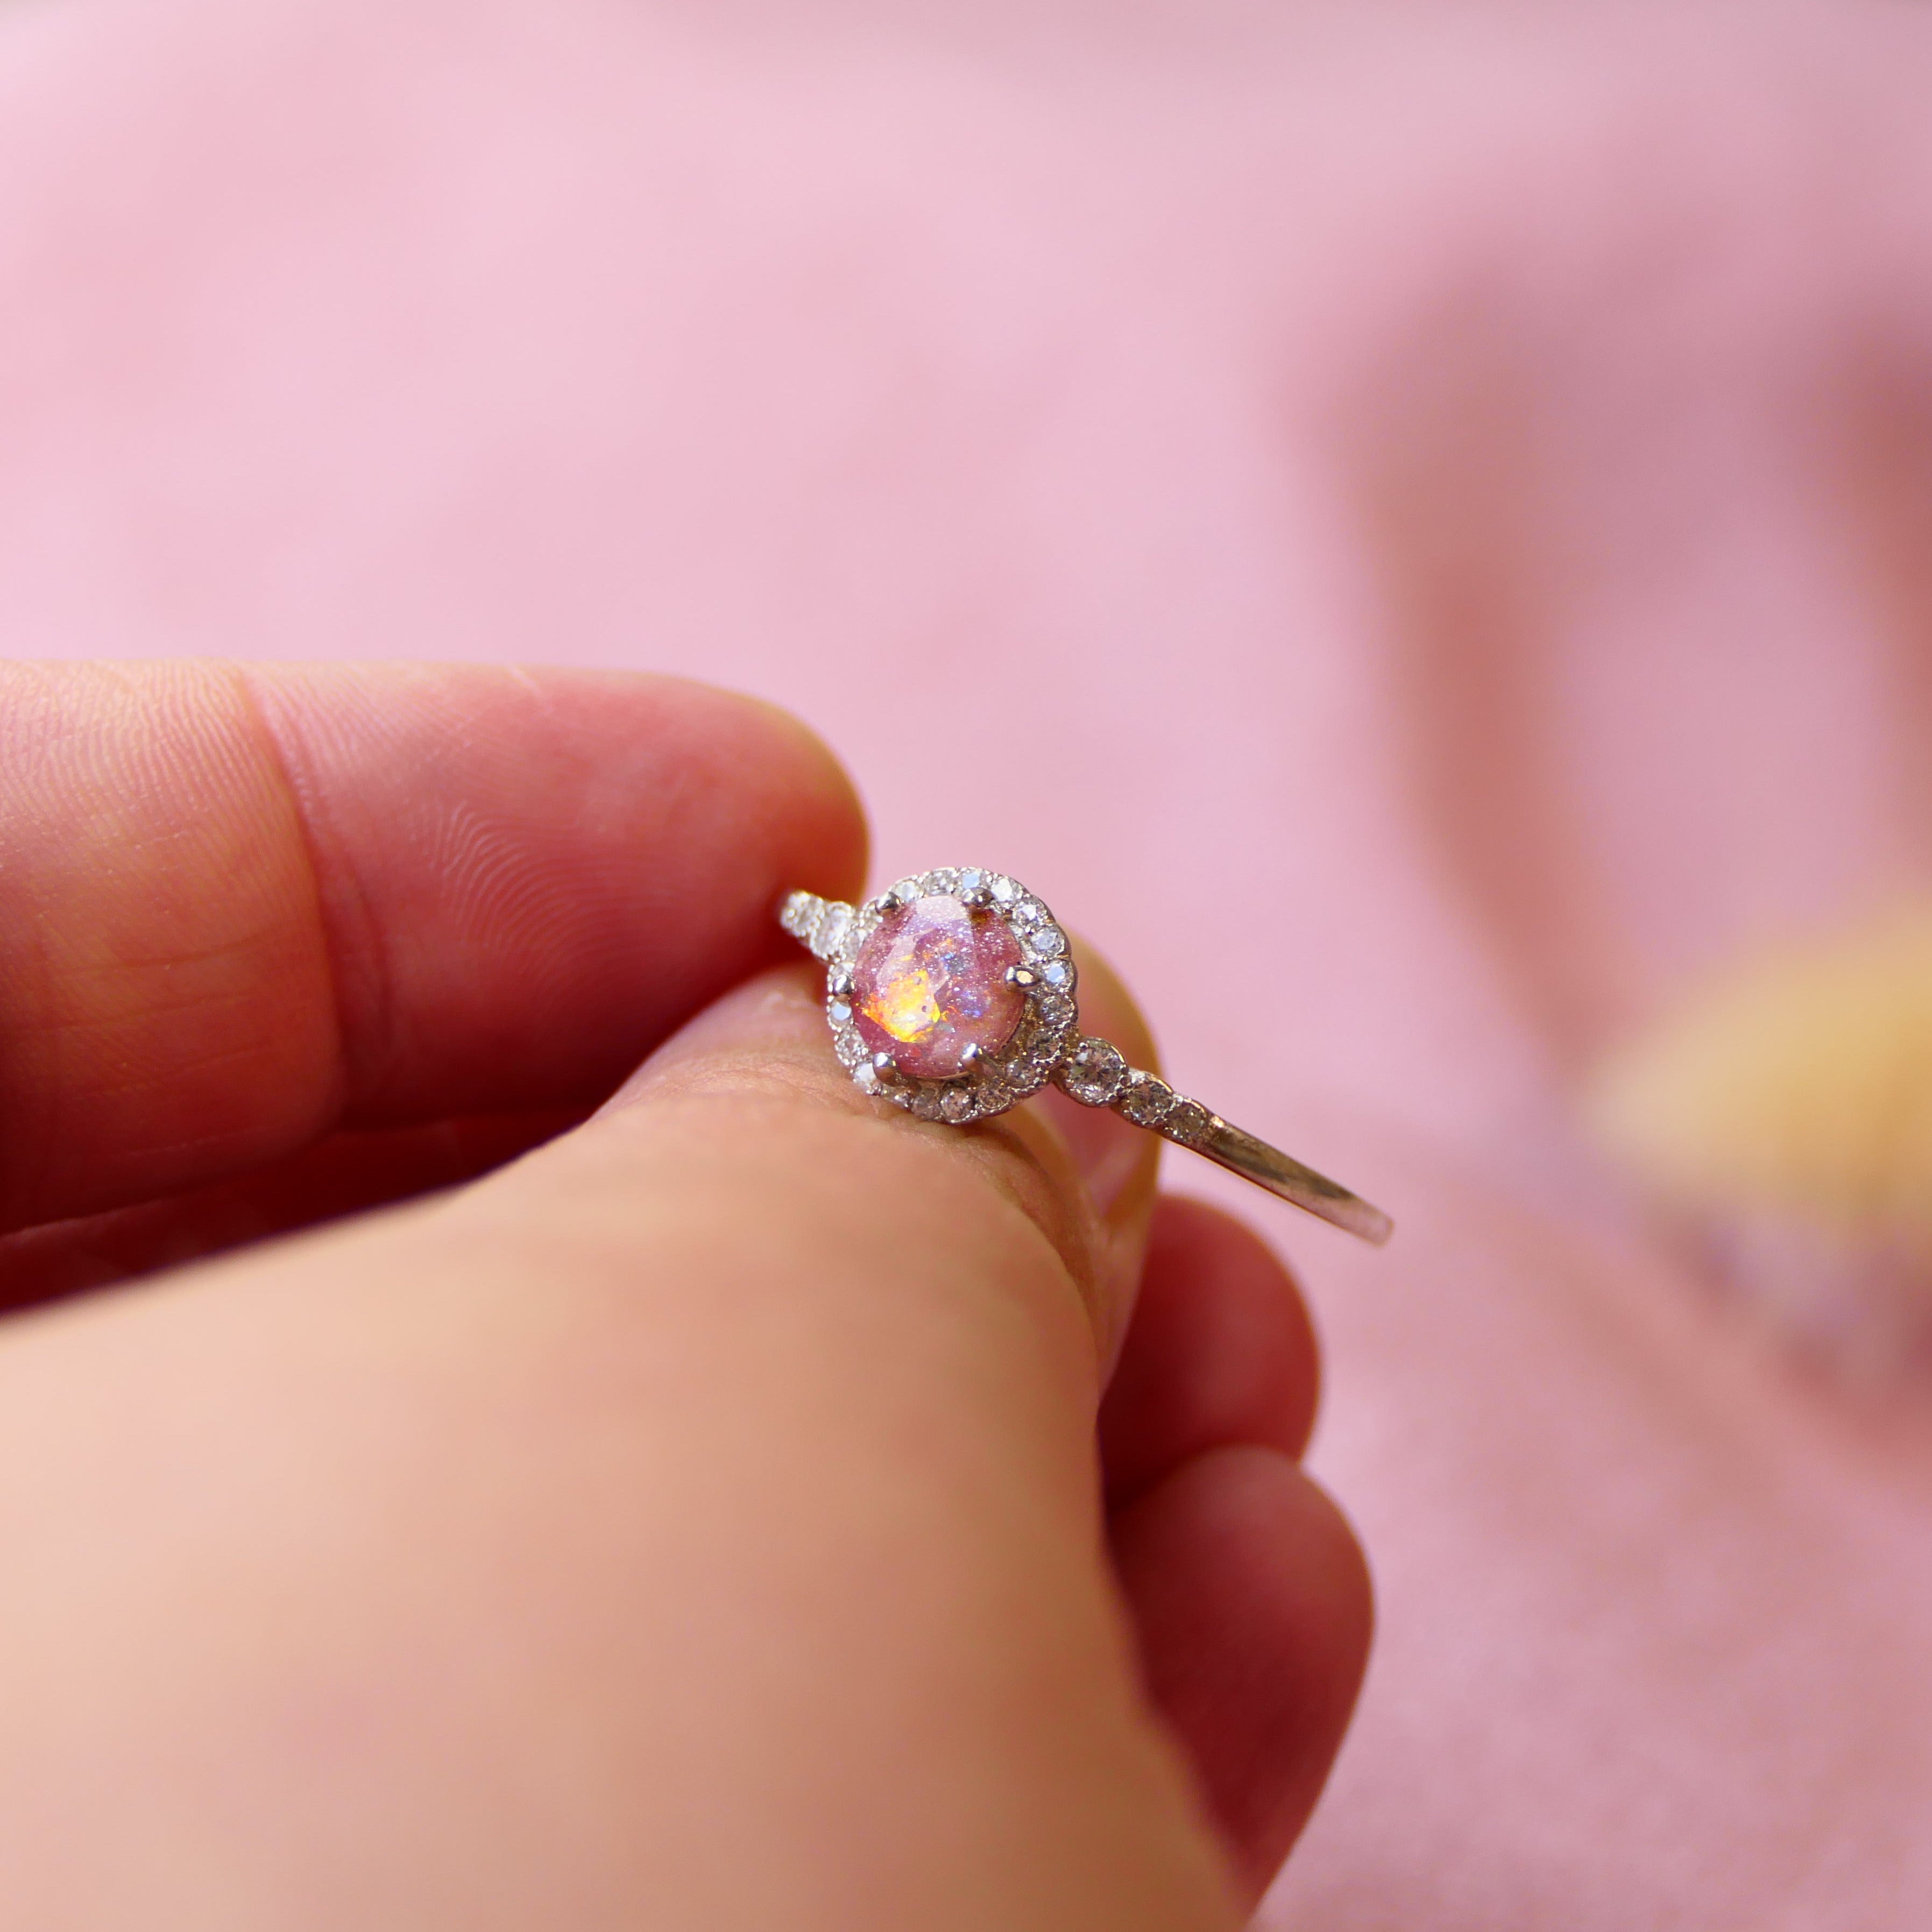 Ashes ring with opalescent flecks, cremations and briar rose pink shimmer